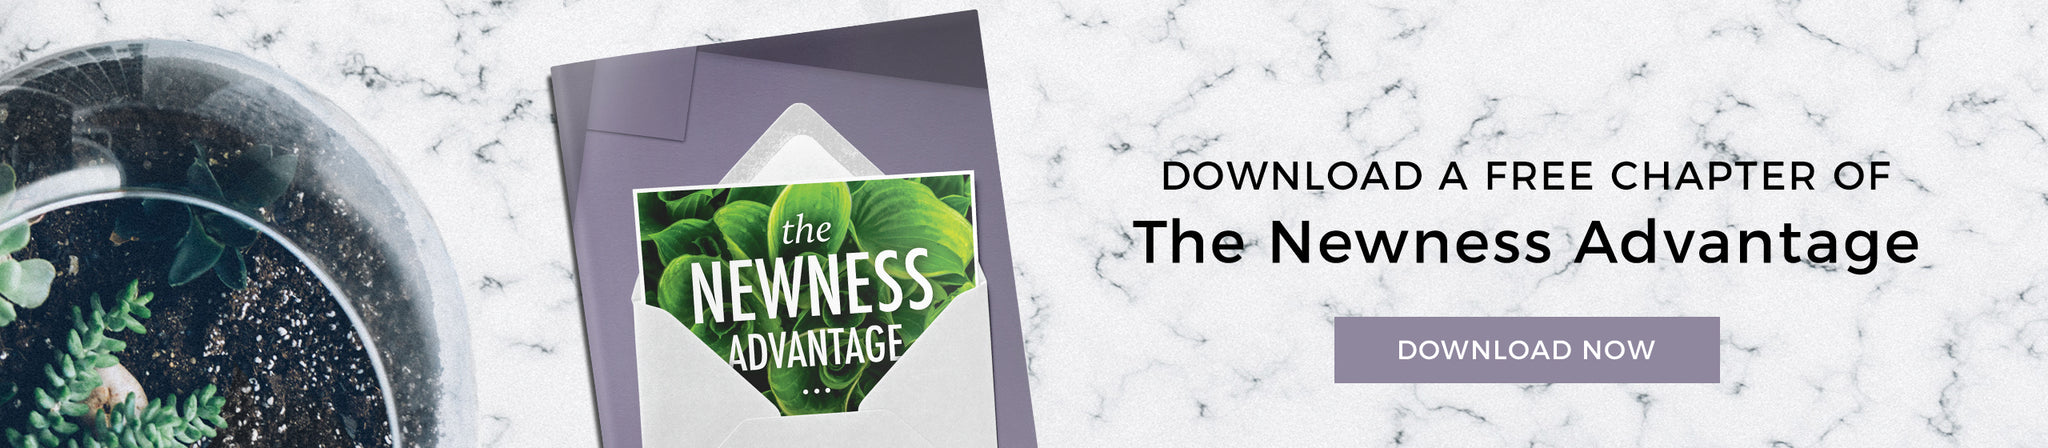 The Newness Advantage Preview